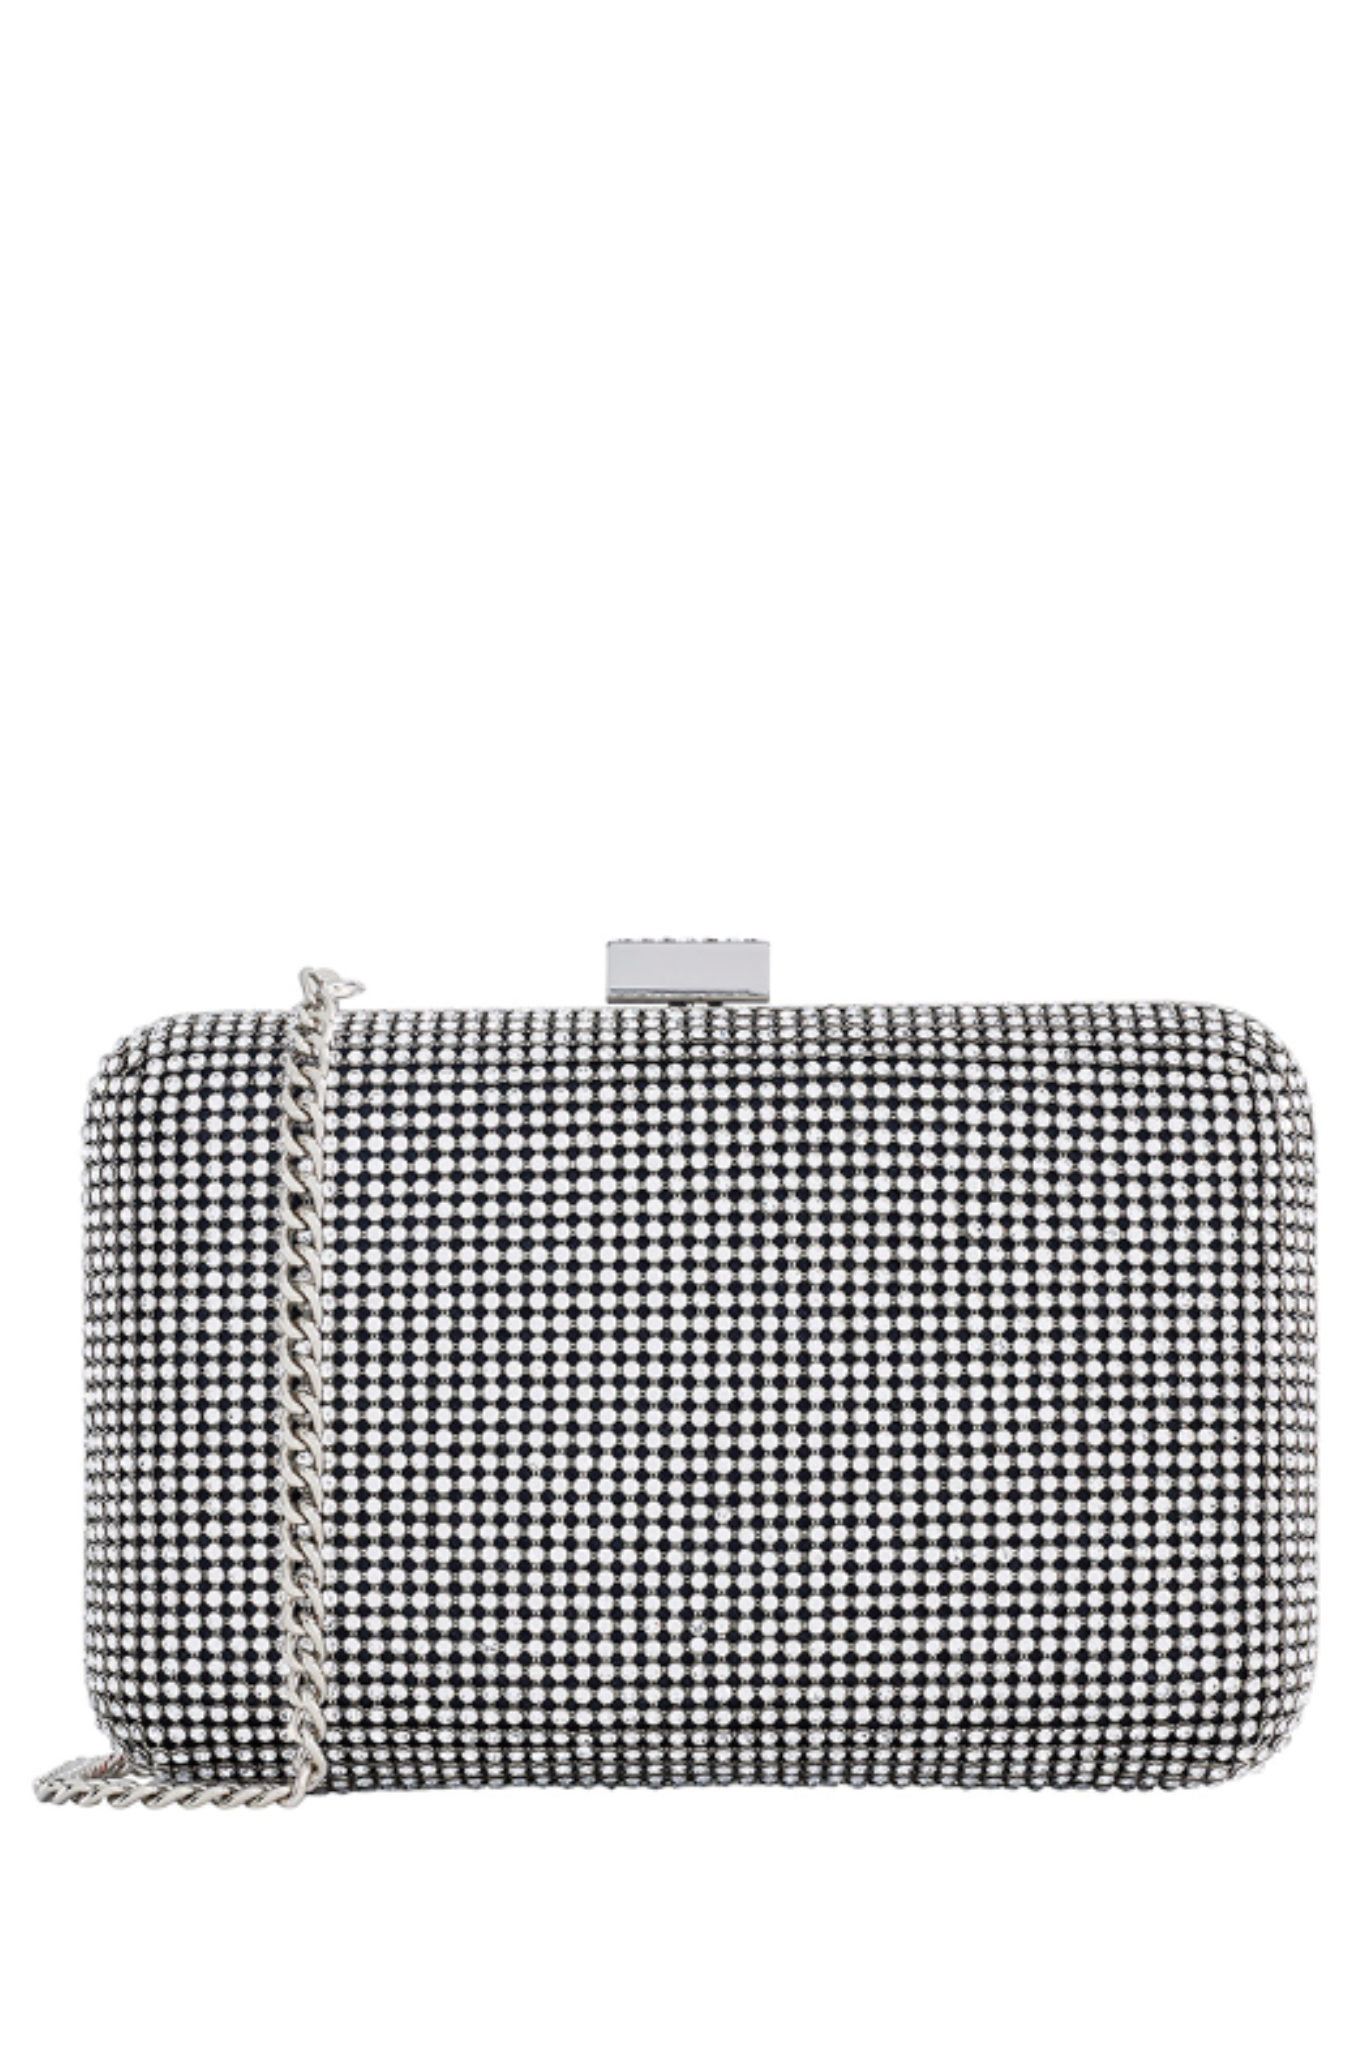 Yves Crystal Clutch in Silver by Whiting and Davis - RENTAL